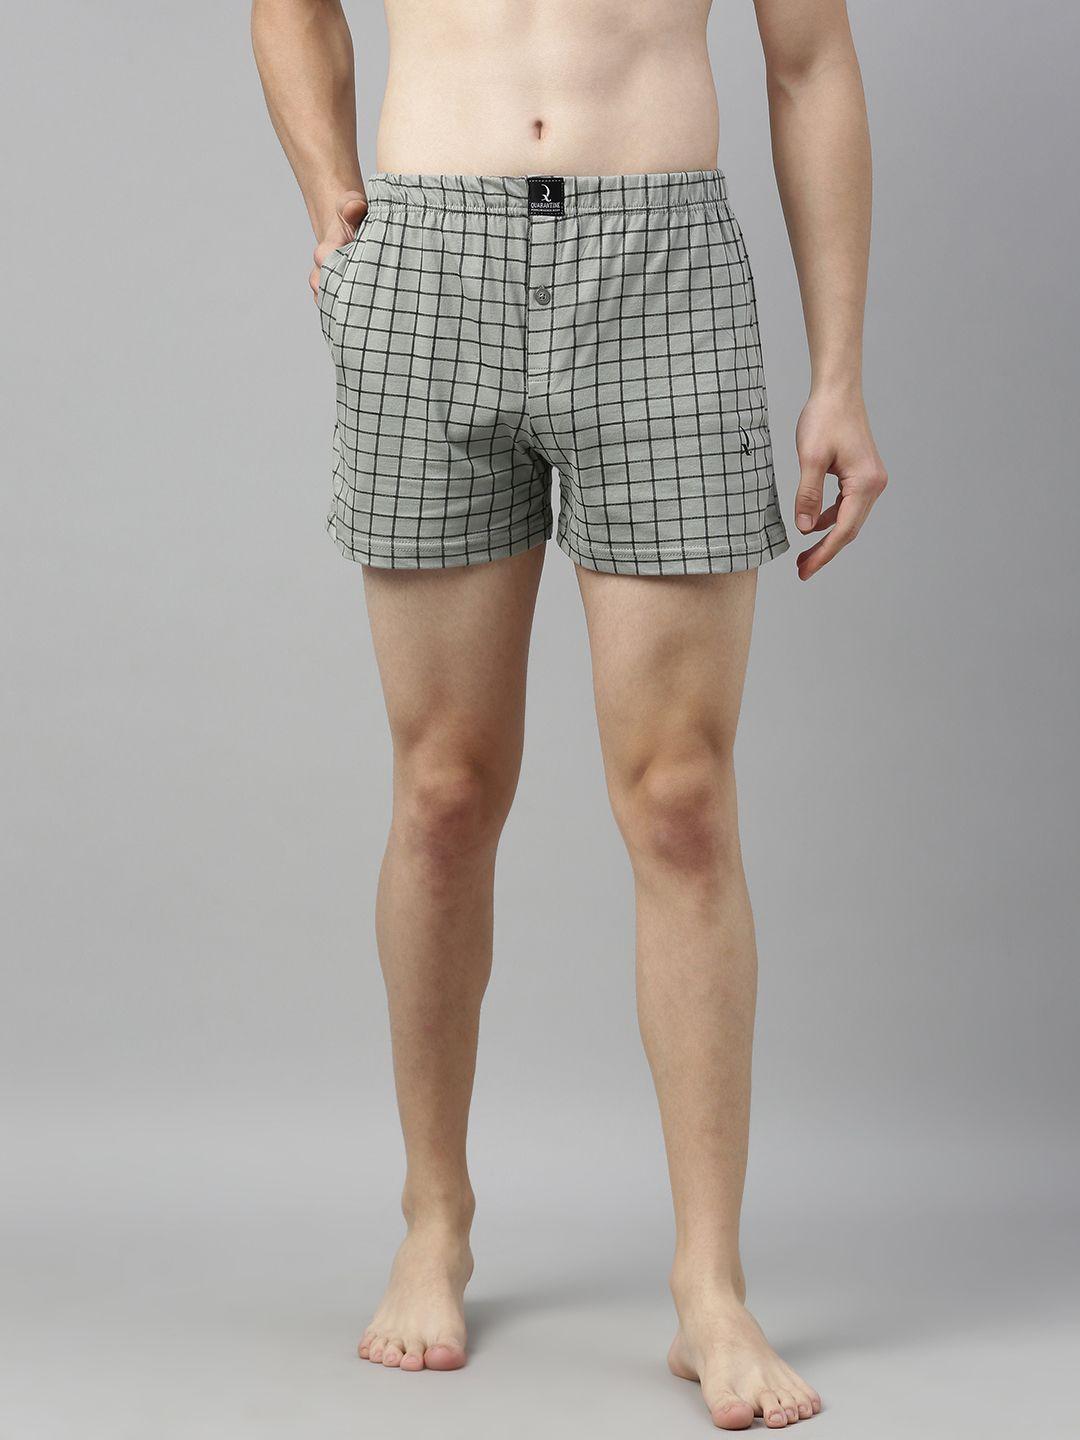 quarantine-men-grey-and-black-checked-pure-cotton-boxers-qbxm001gry-s